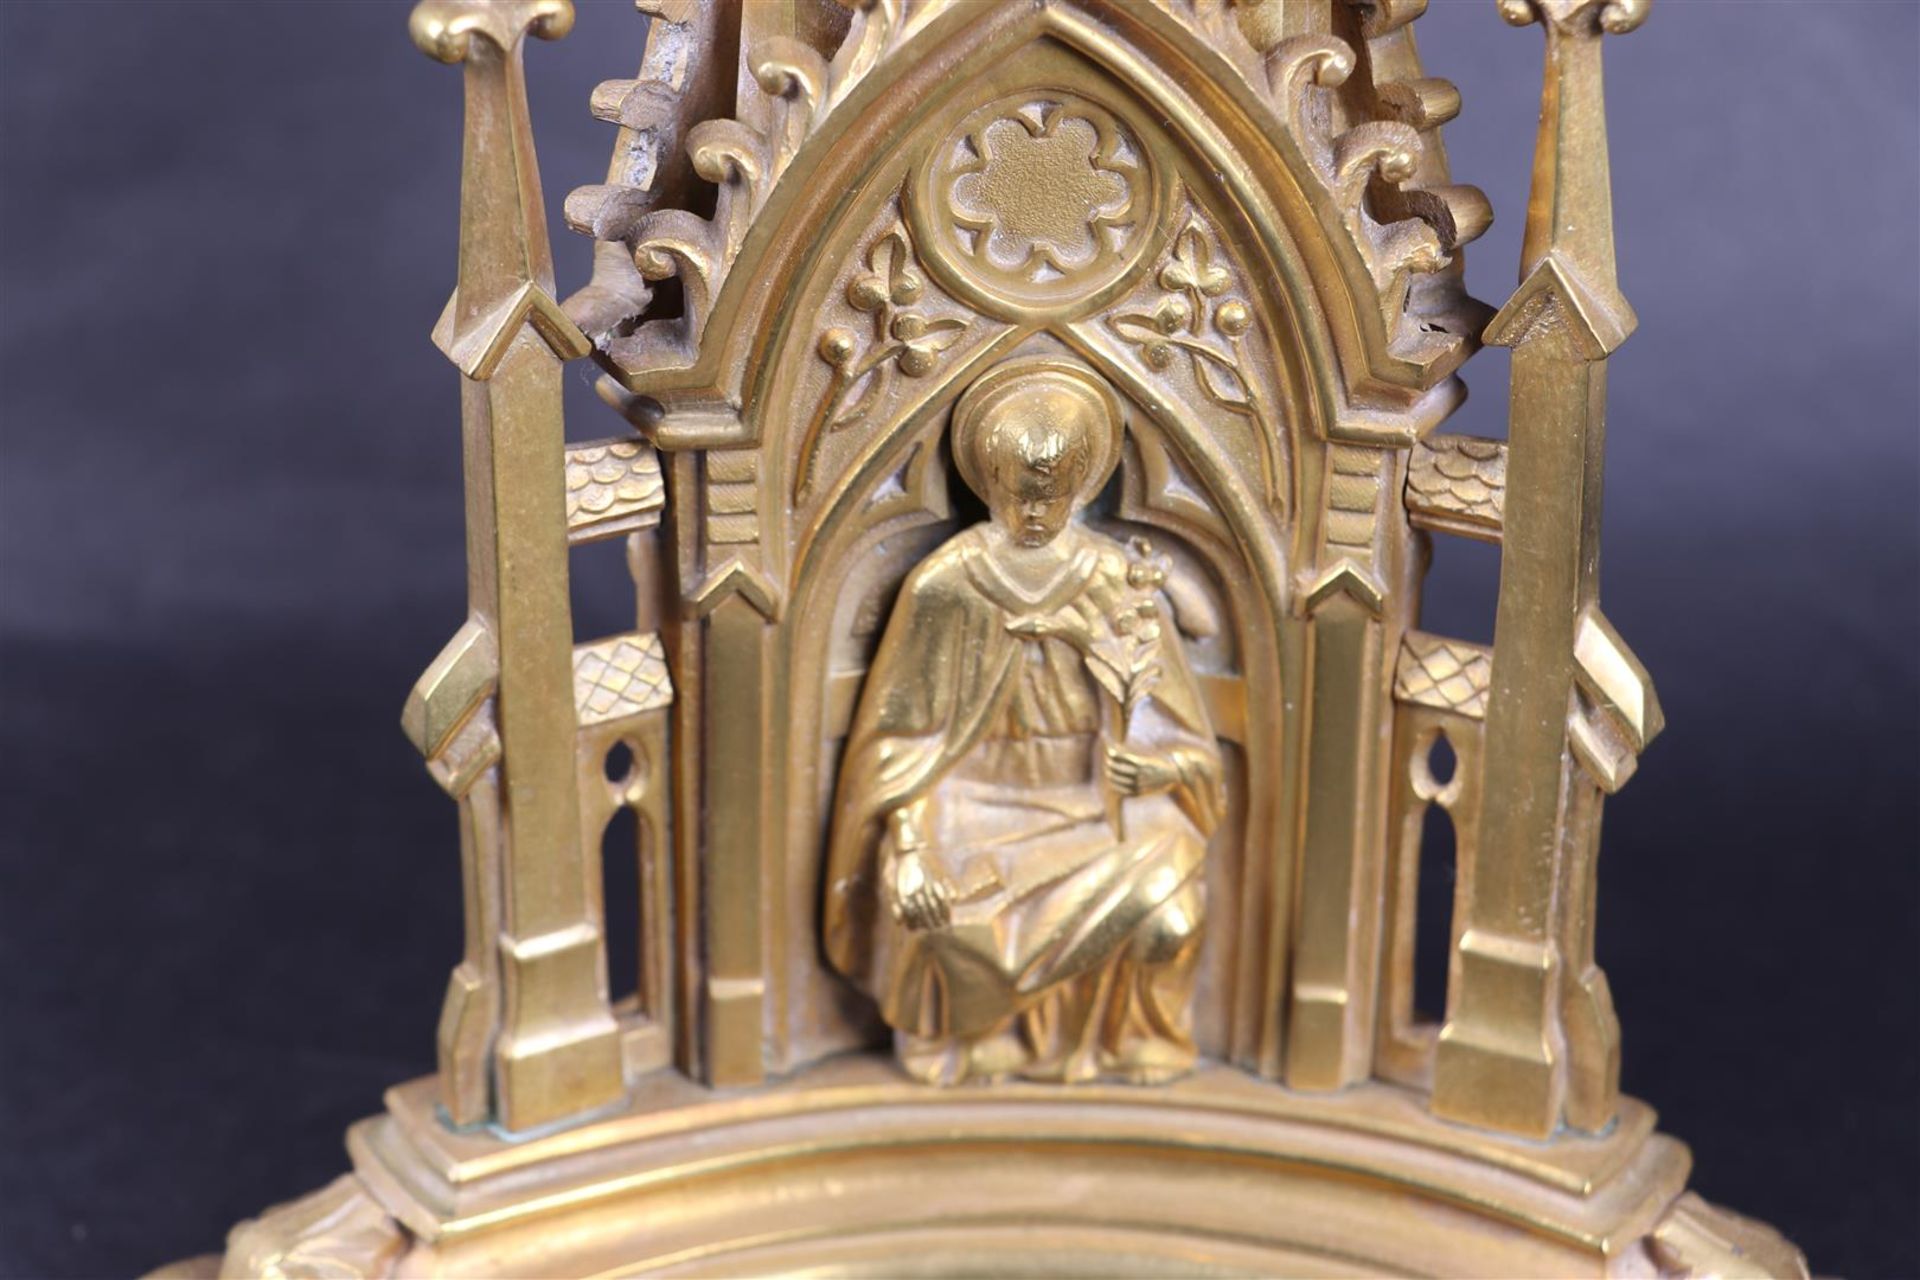 Neo-Gothic Ormolu Altar Candlestick with Images of Church Fathers (Approx. 1880) - Image 3 of 6